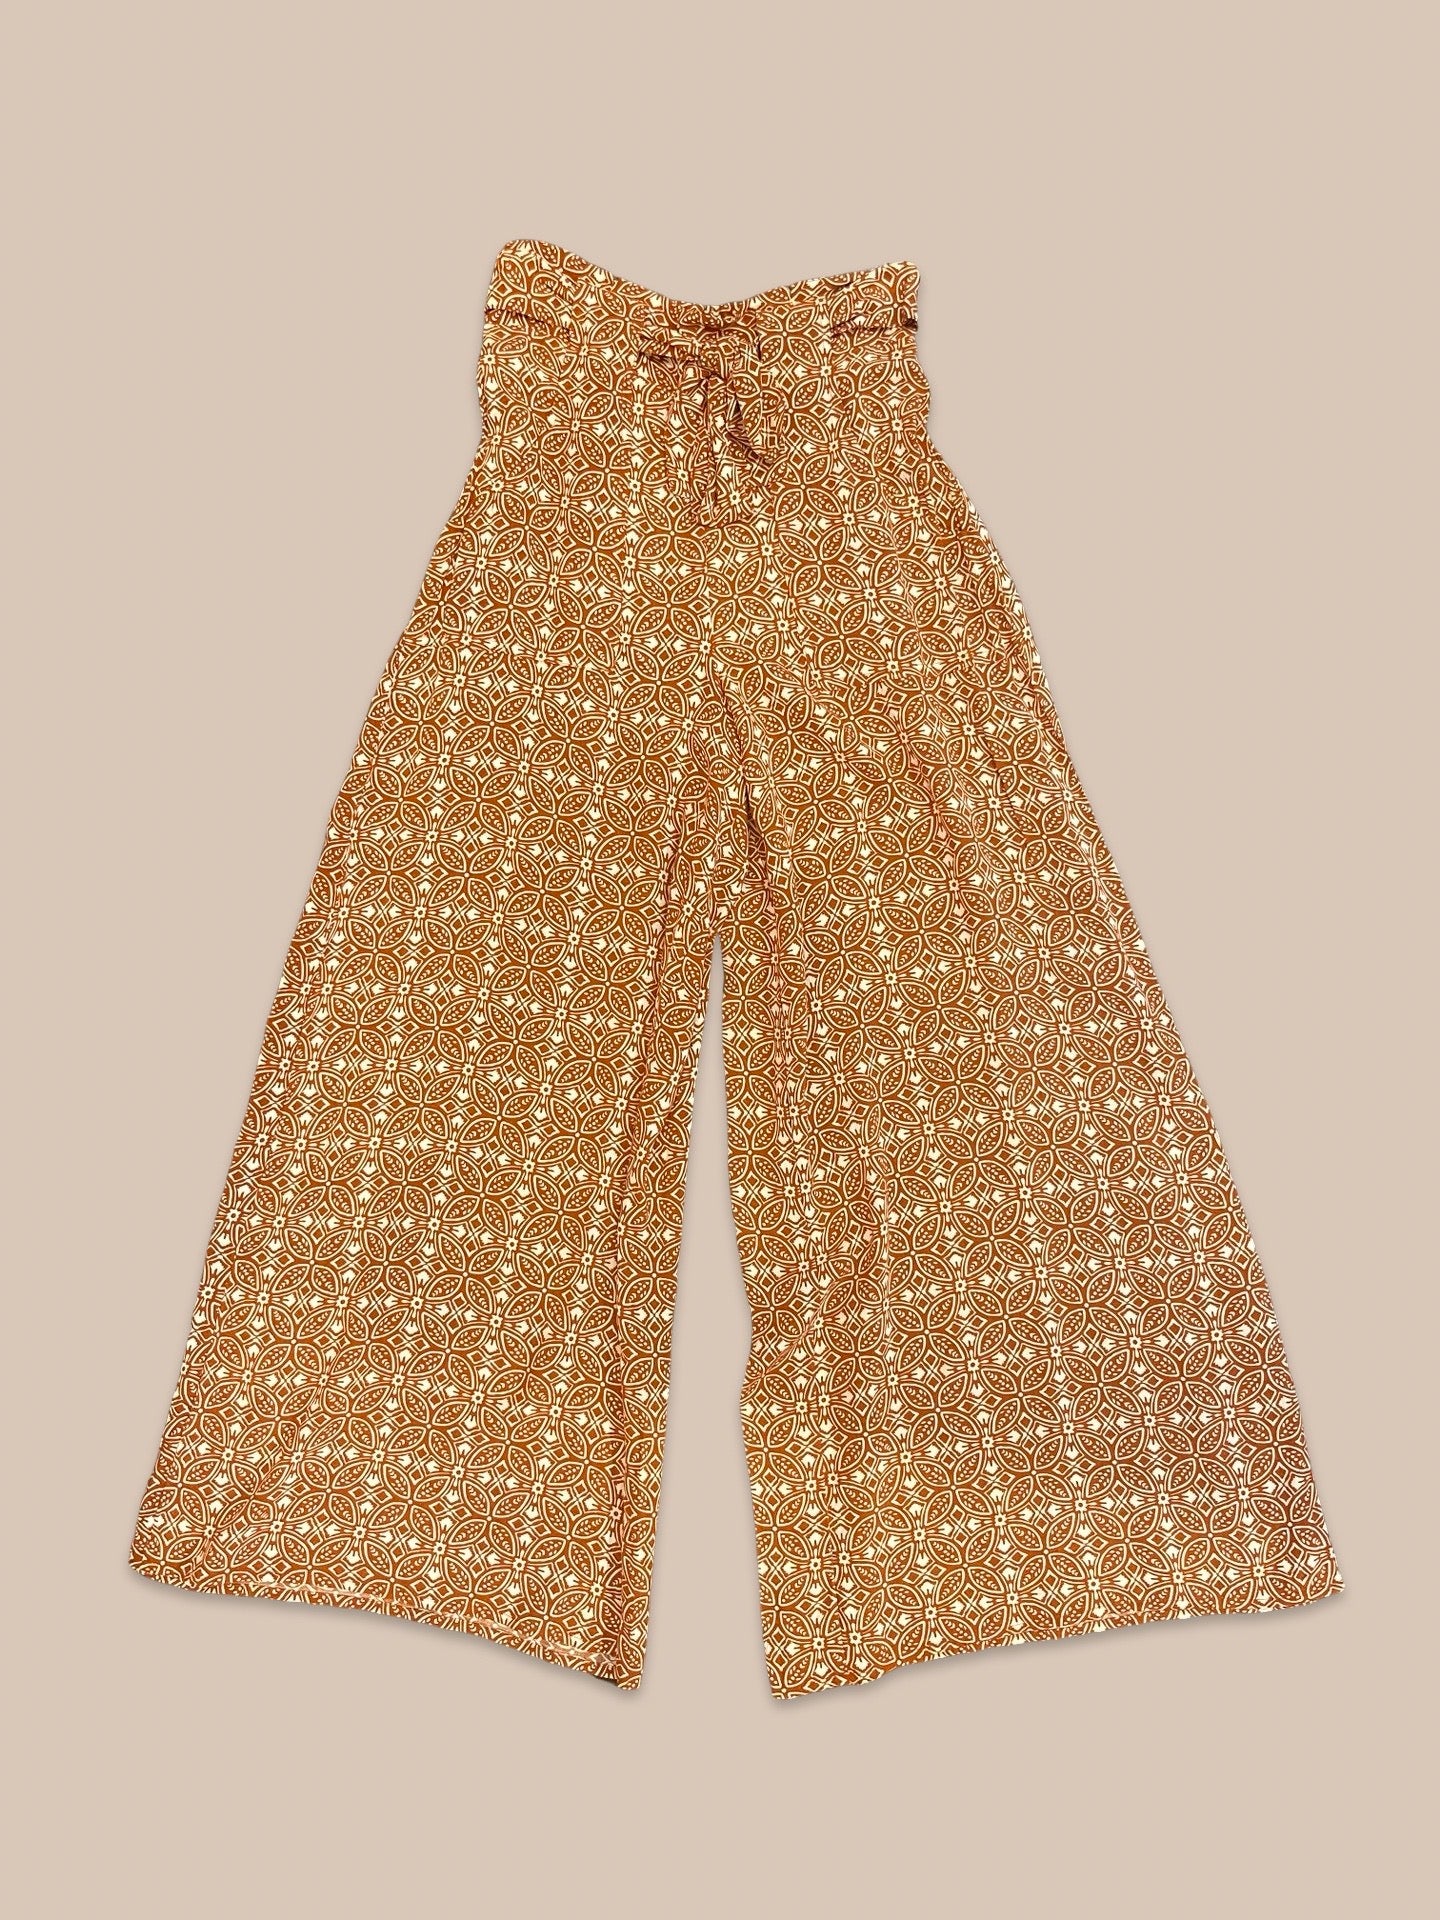 The Lucca Pants